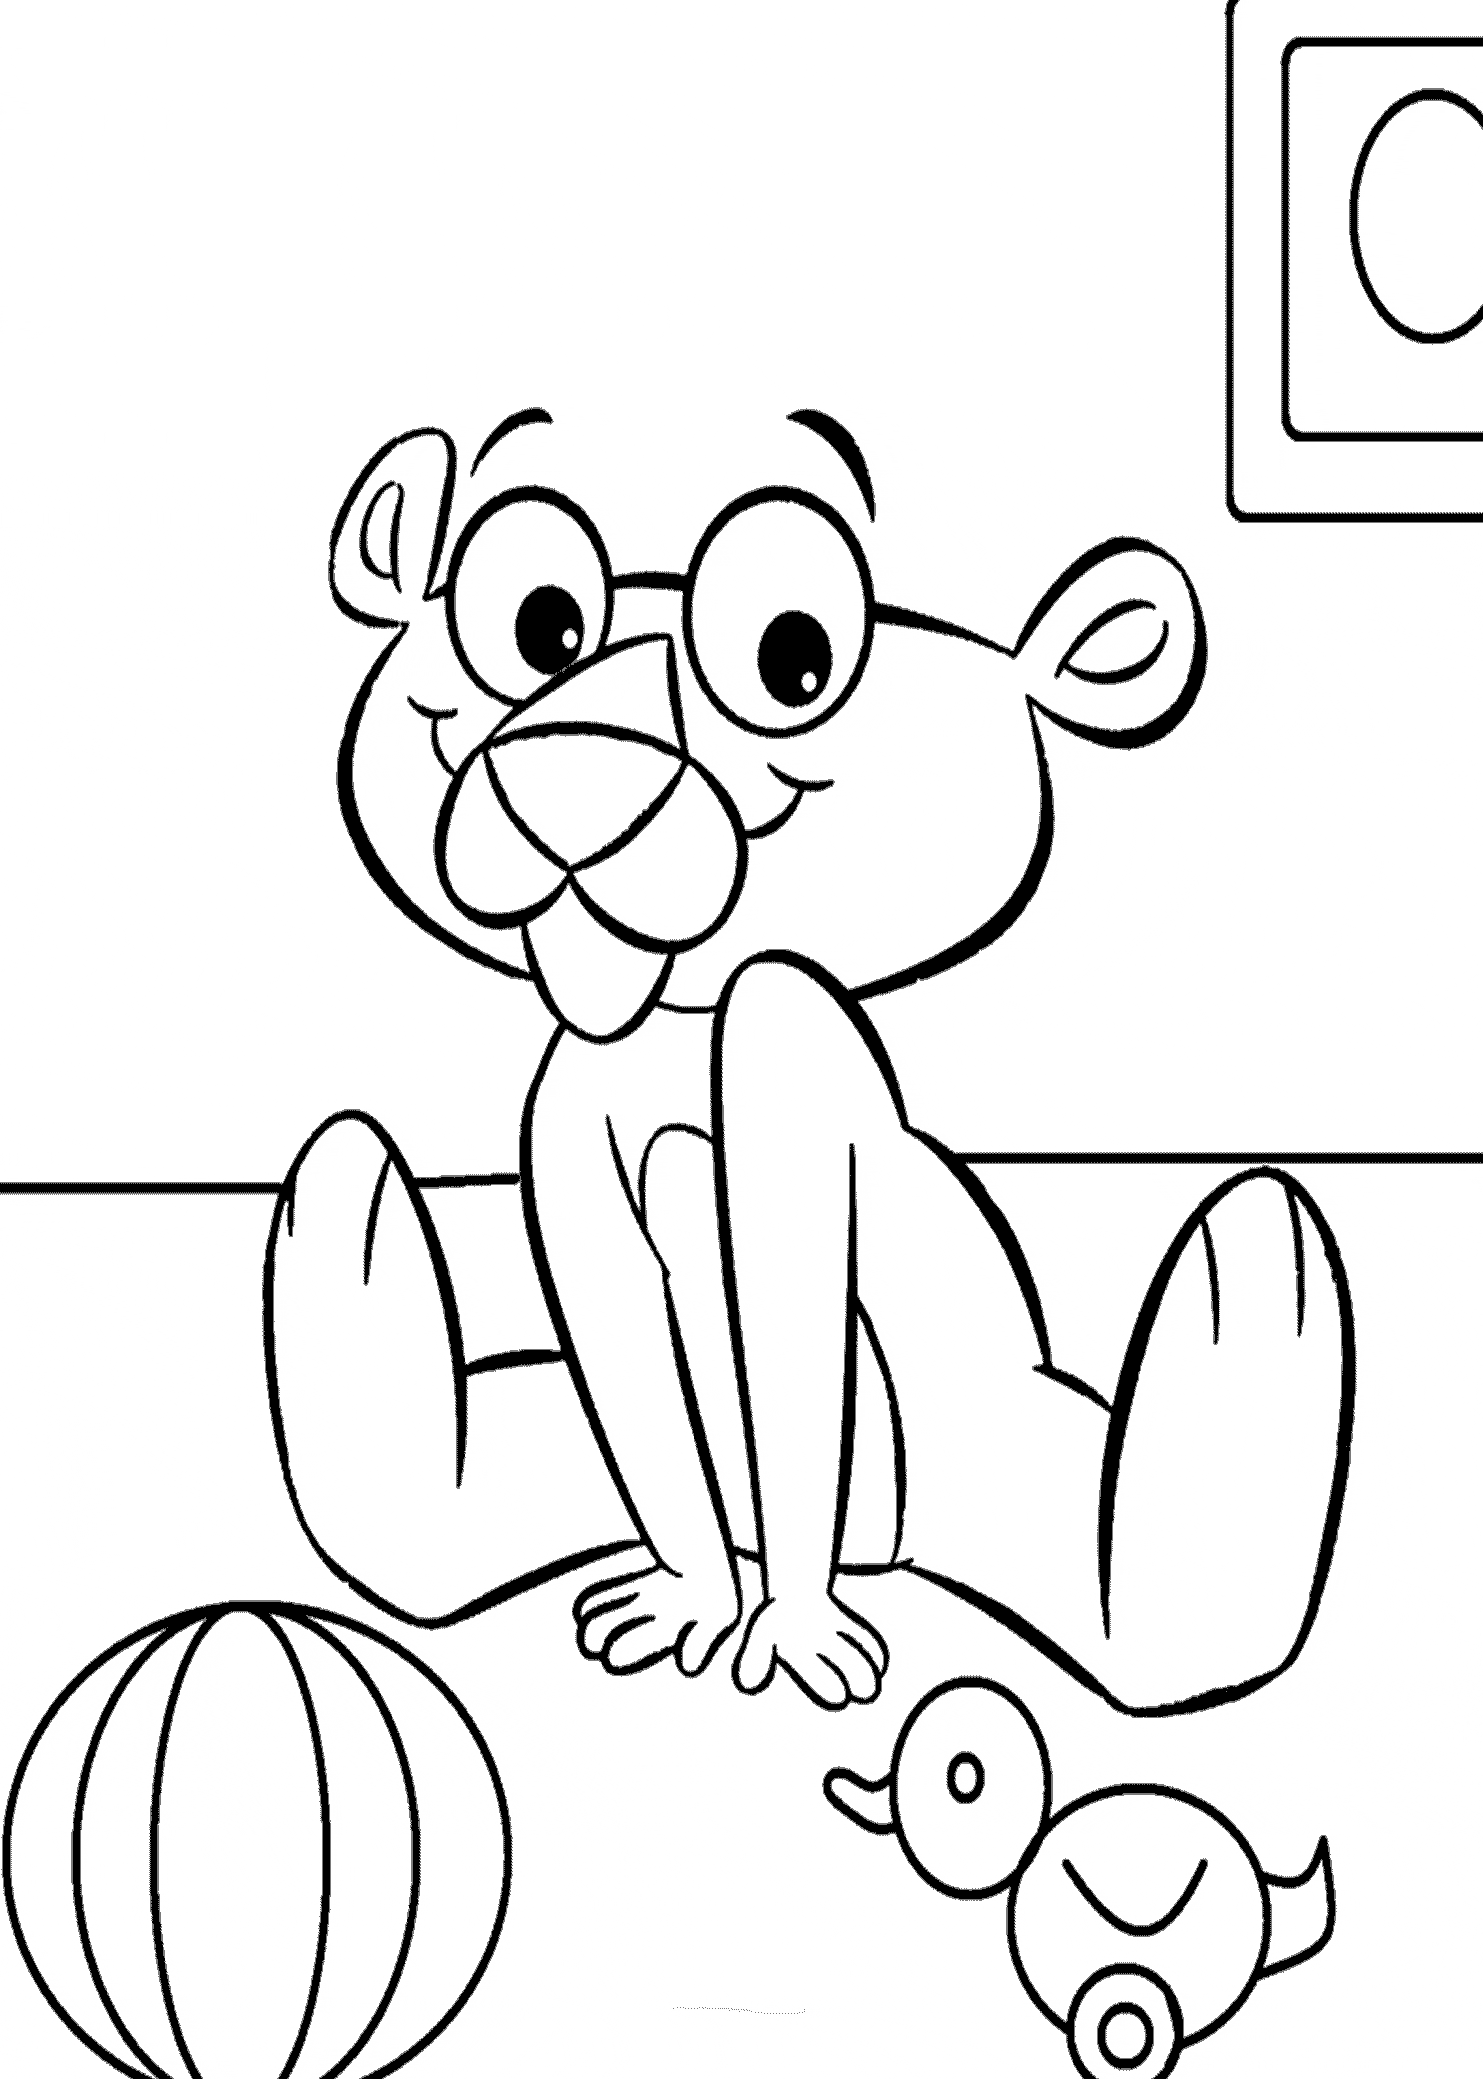 Pink panther cartoon coloring pages download and print for ...